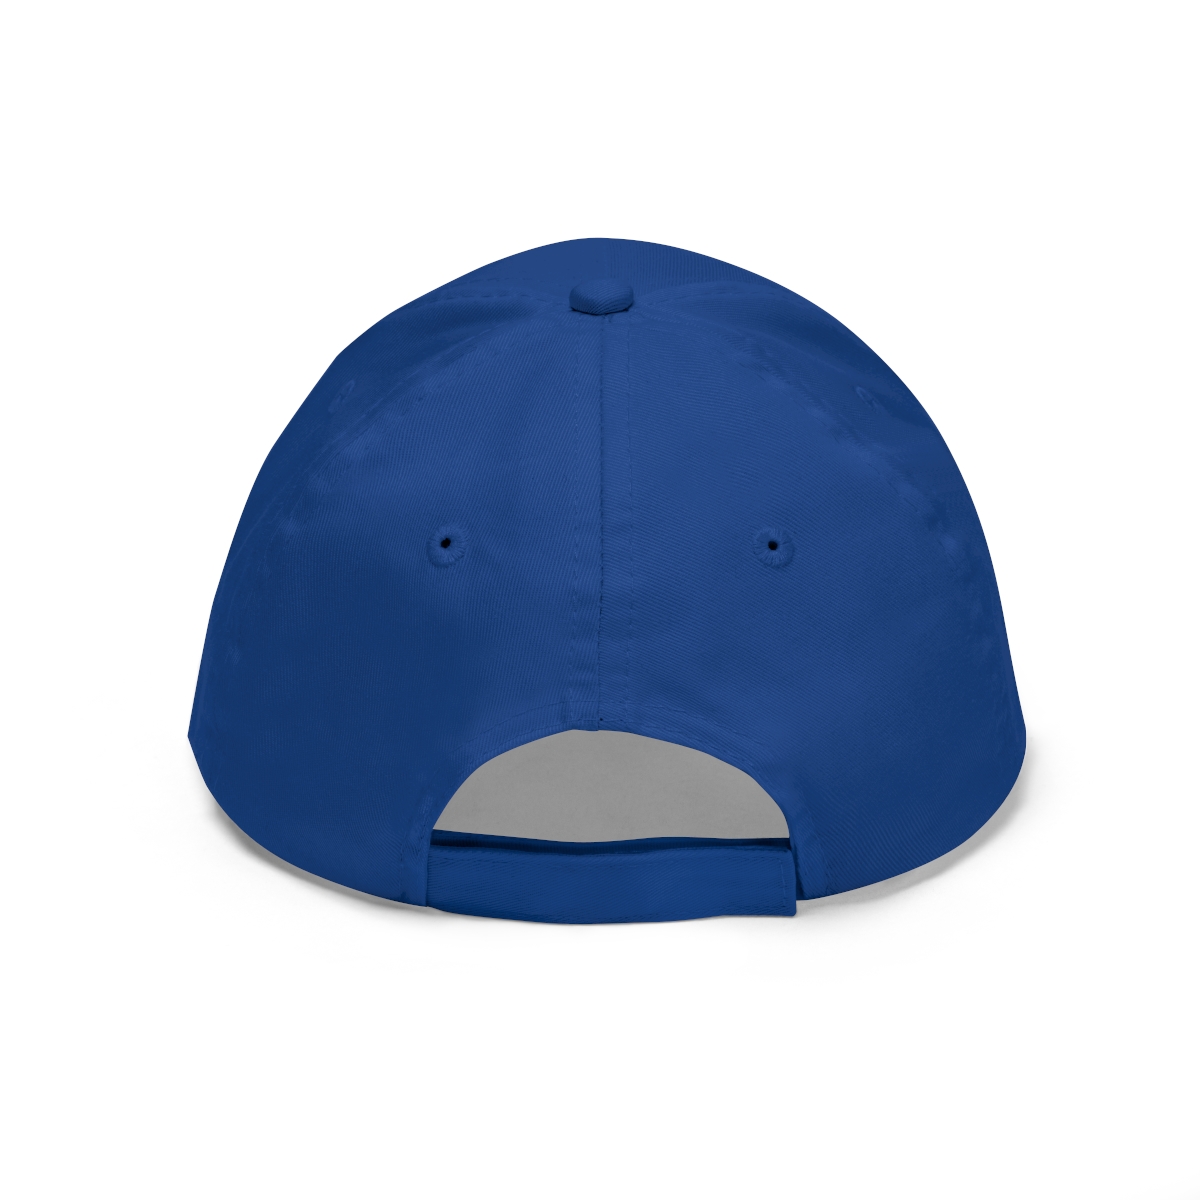 GAXLAND Embroidered Hat product thumbnail image